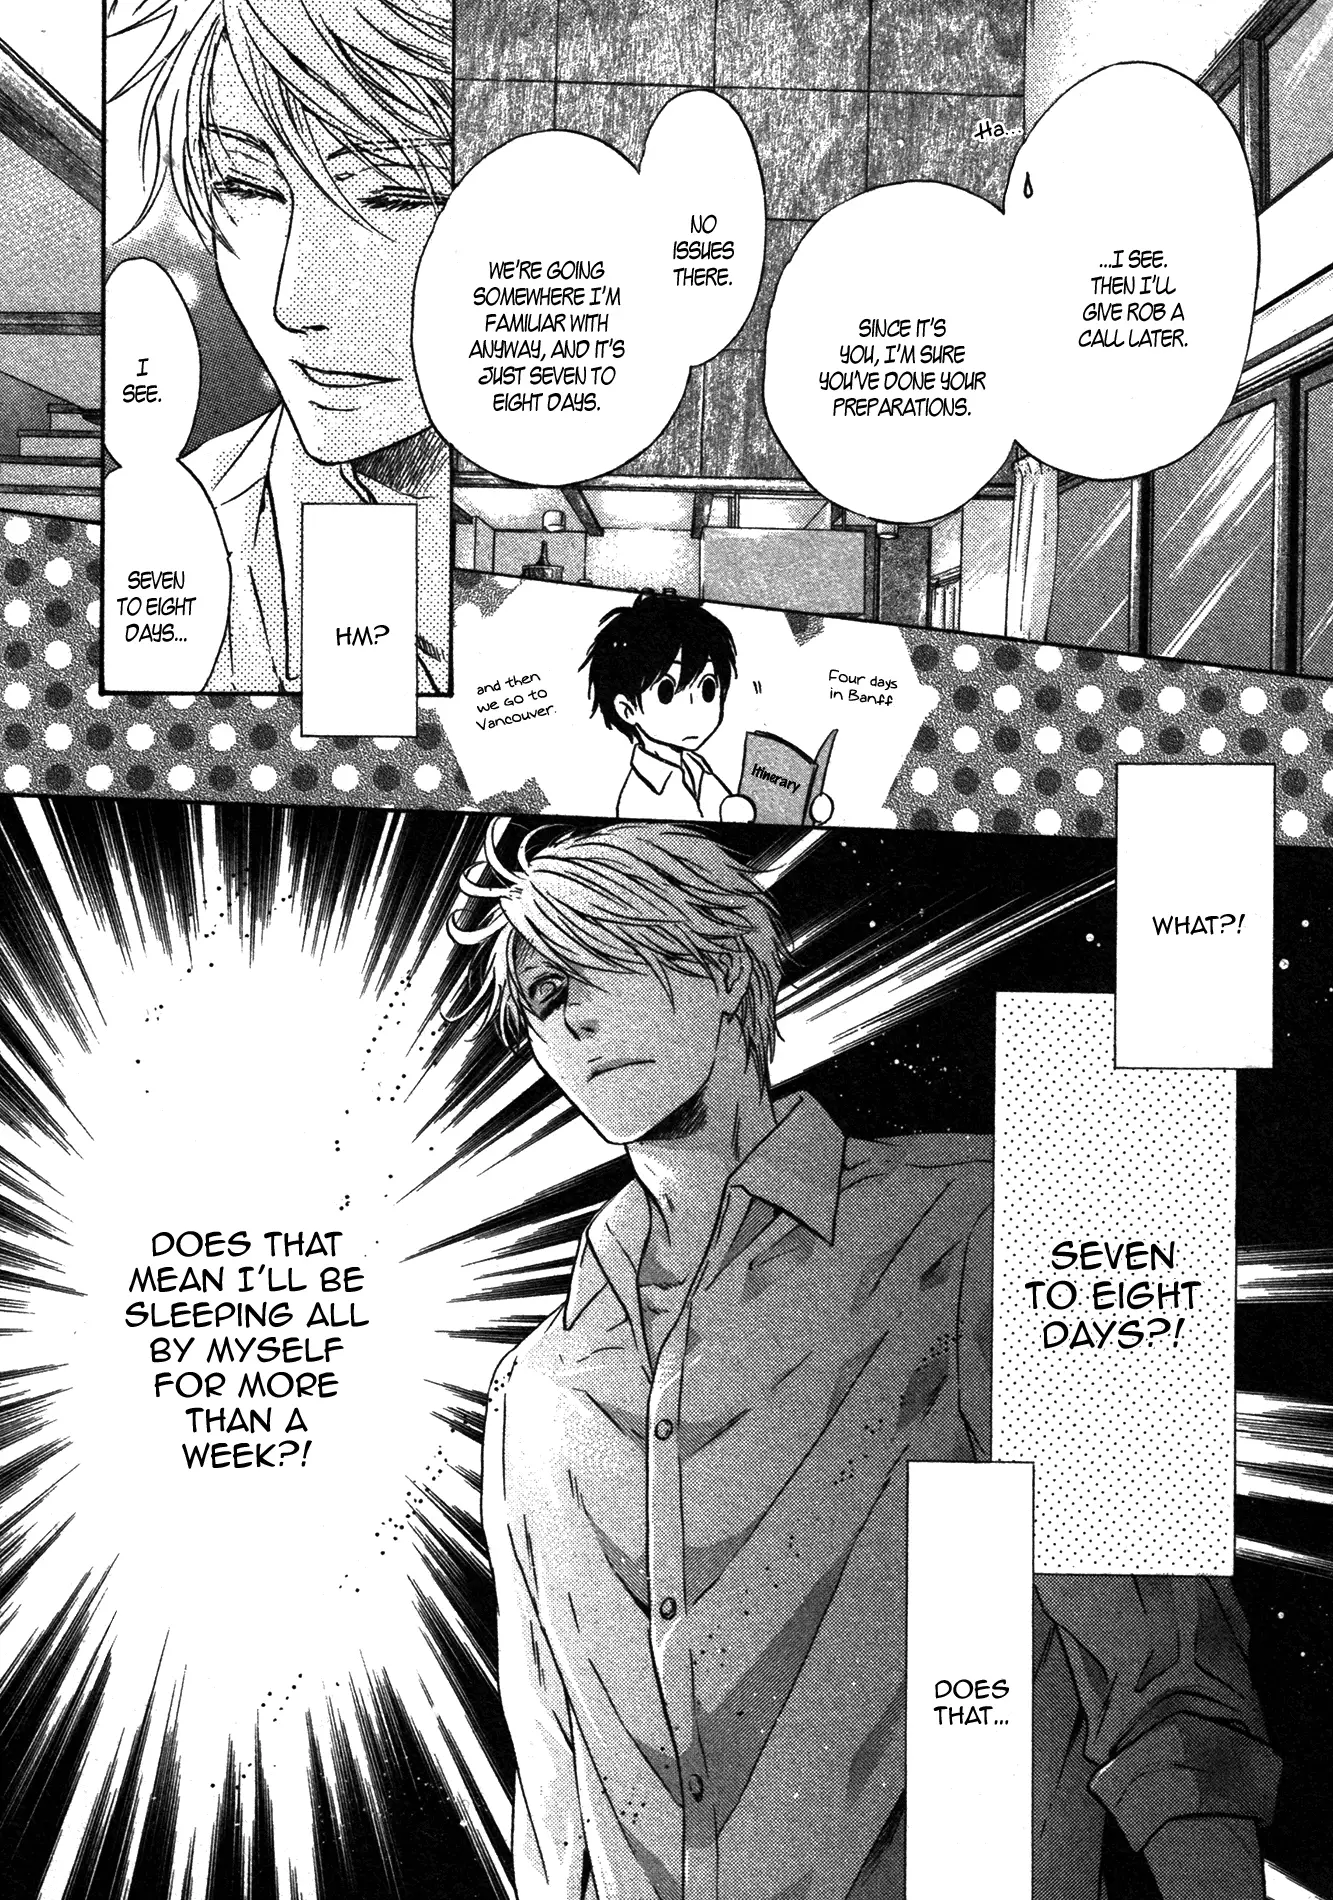 Super Lovers - 35 page 9-7c961347